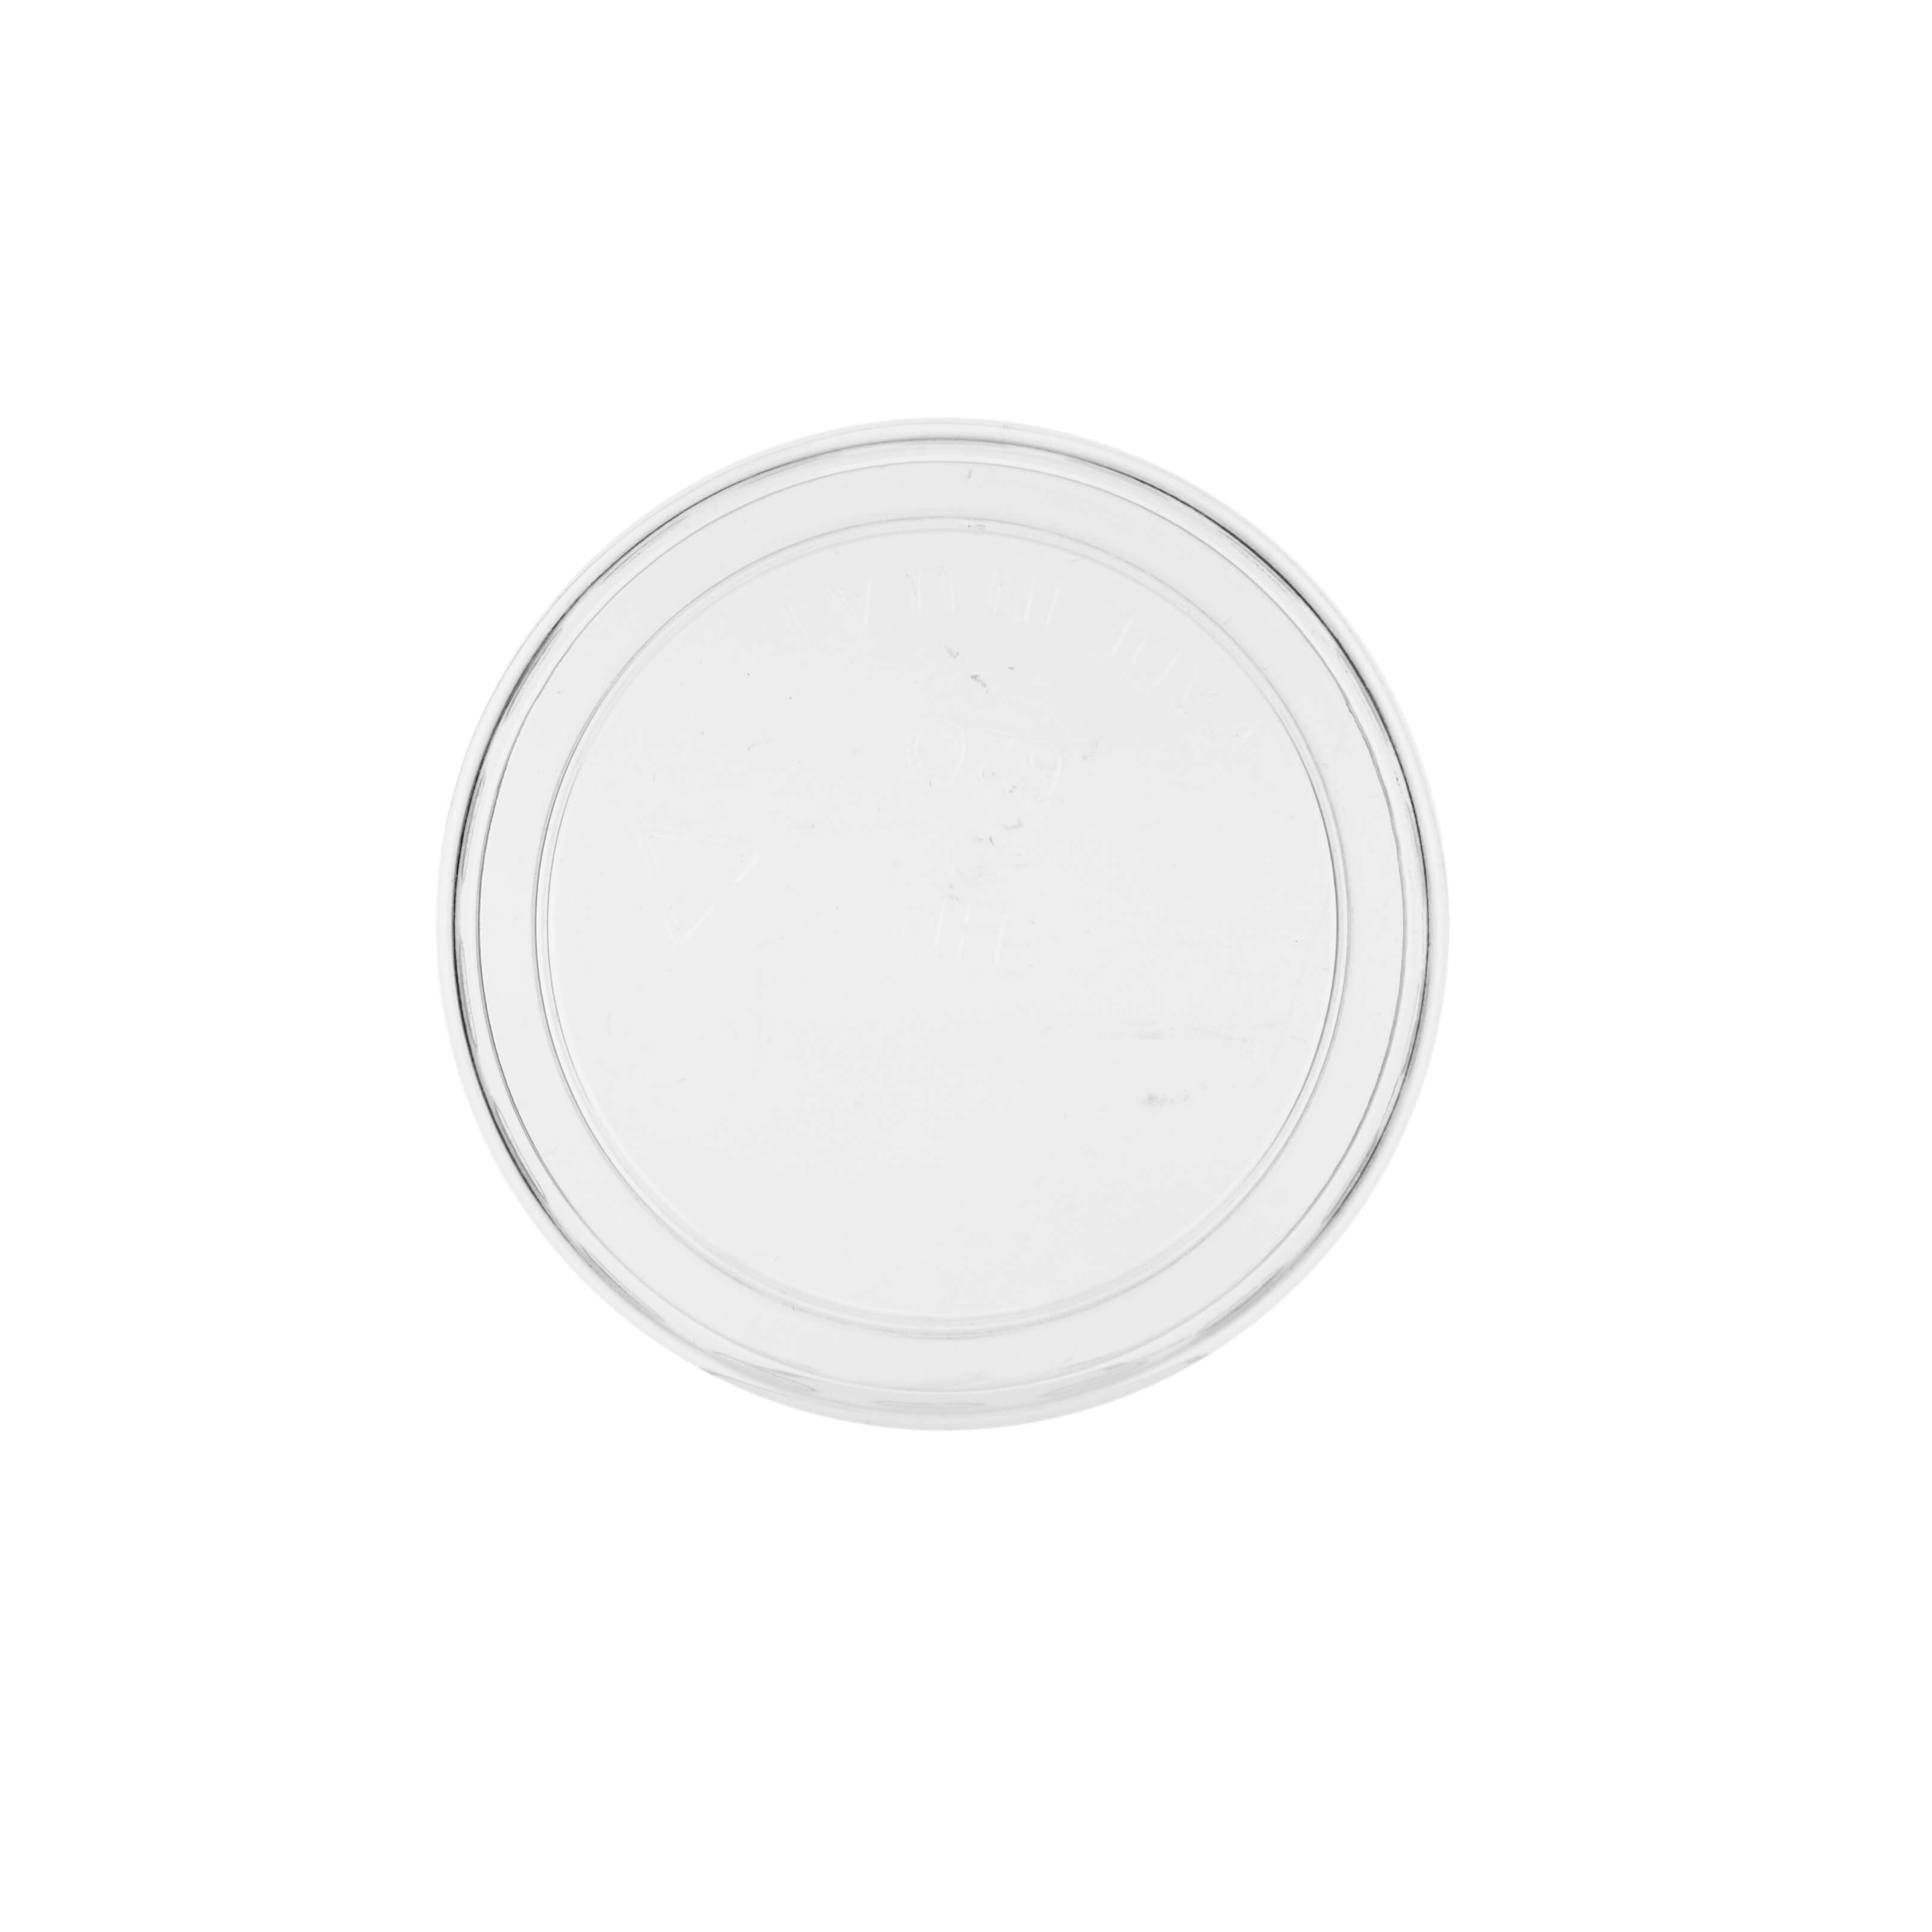 Lid for 2 Oz portion cup for sauces, condiments - Hotpack Global